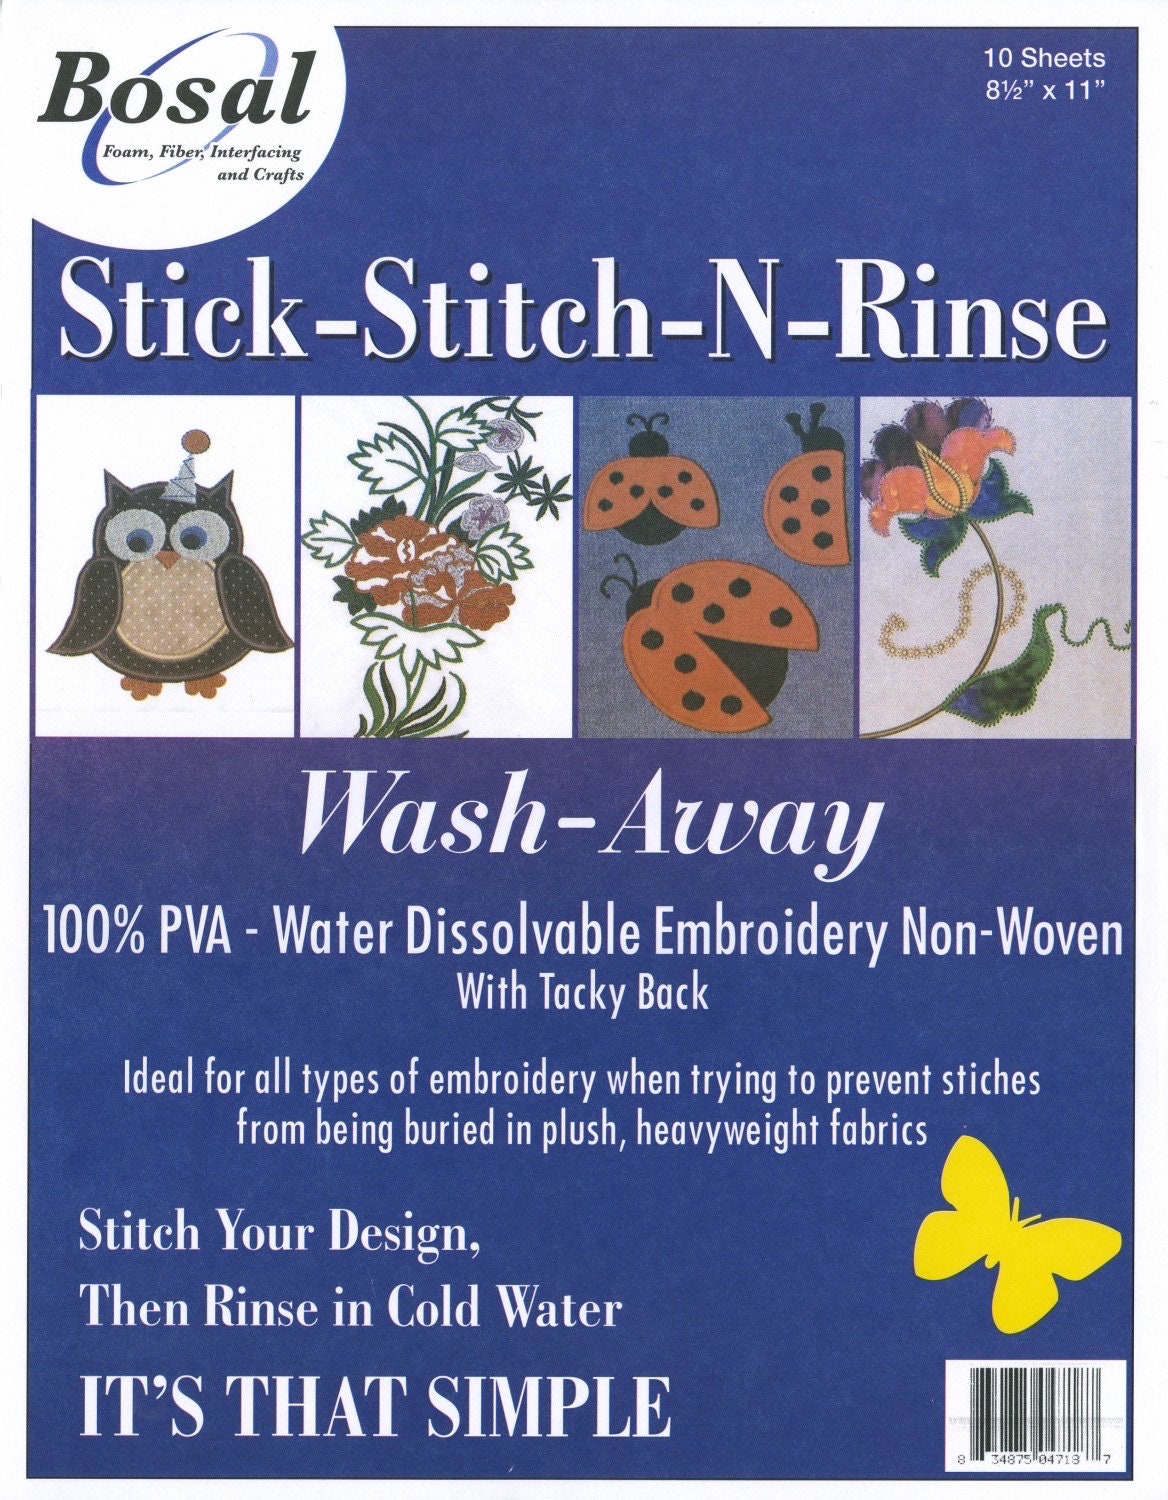 Bosal Stick-stitch-n-rinse Wash Away Stabilizer Ideal for Embroidery 10  Sheets 8 1/2 X 11 